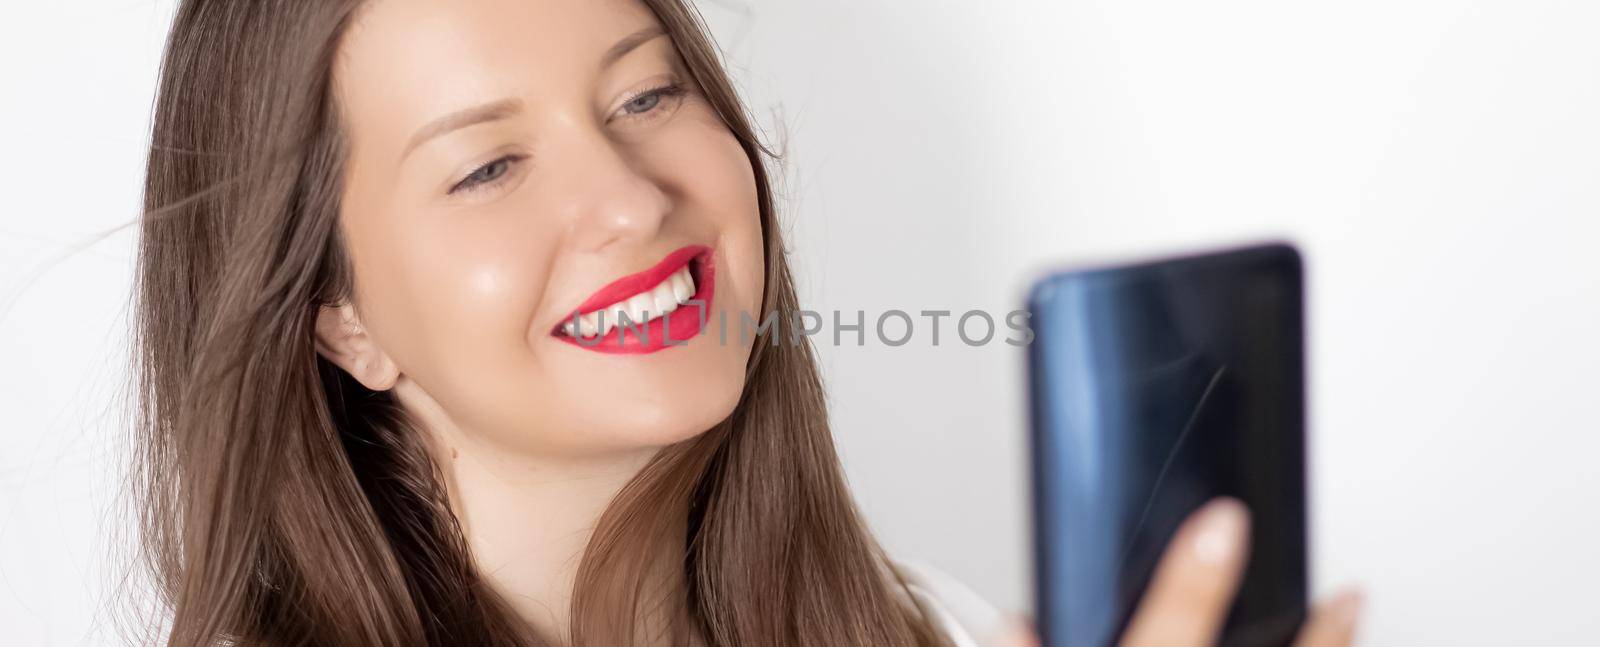 Happy smiling woman with smartphone having video call or taking selfie, portrait on white background. People, technology and communication concept by Anneleven